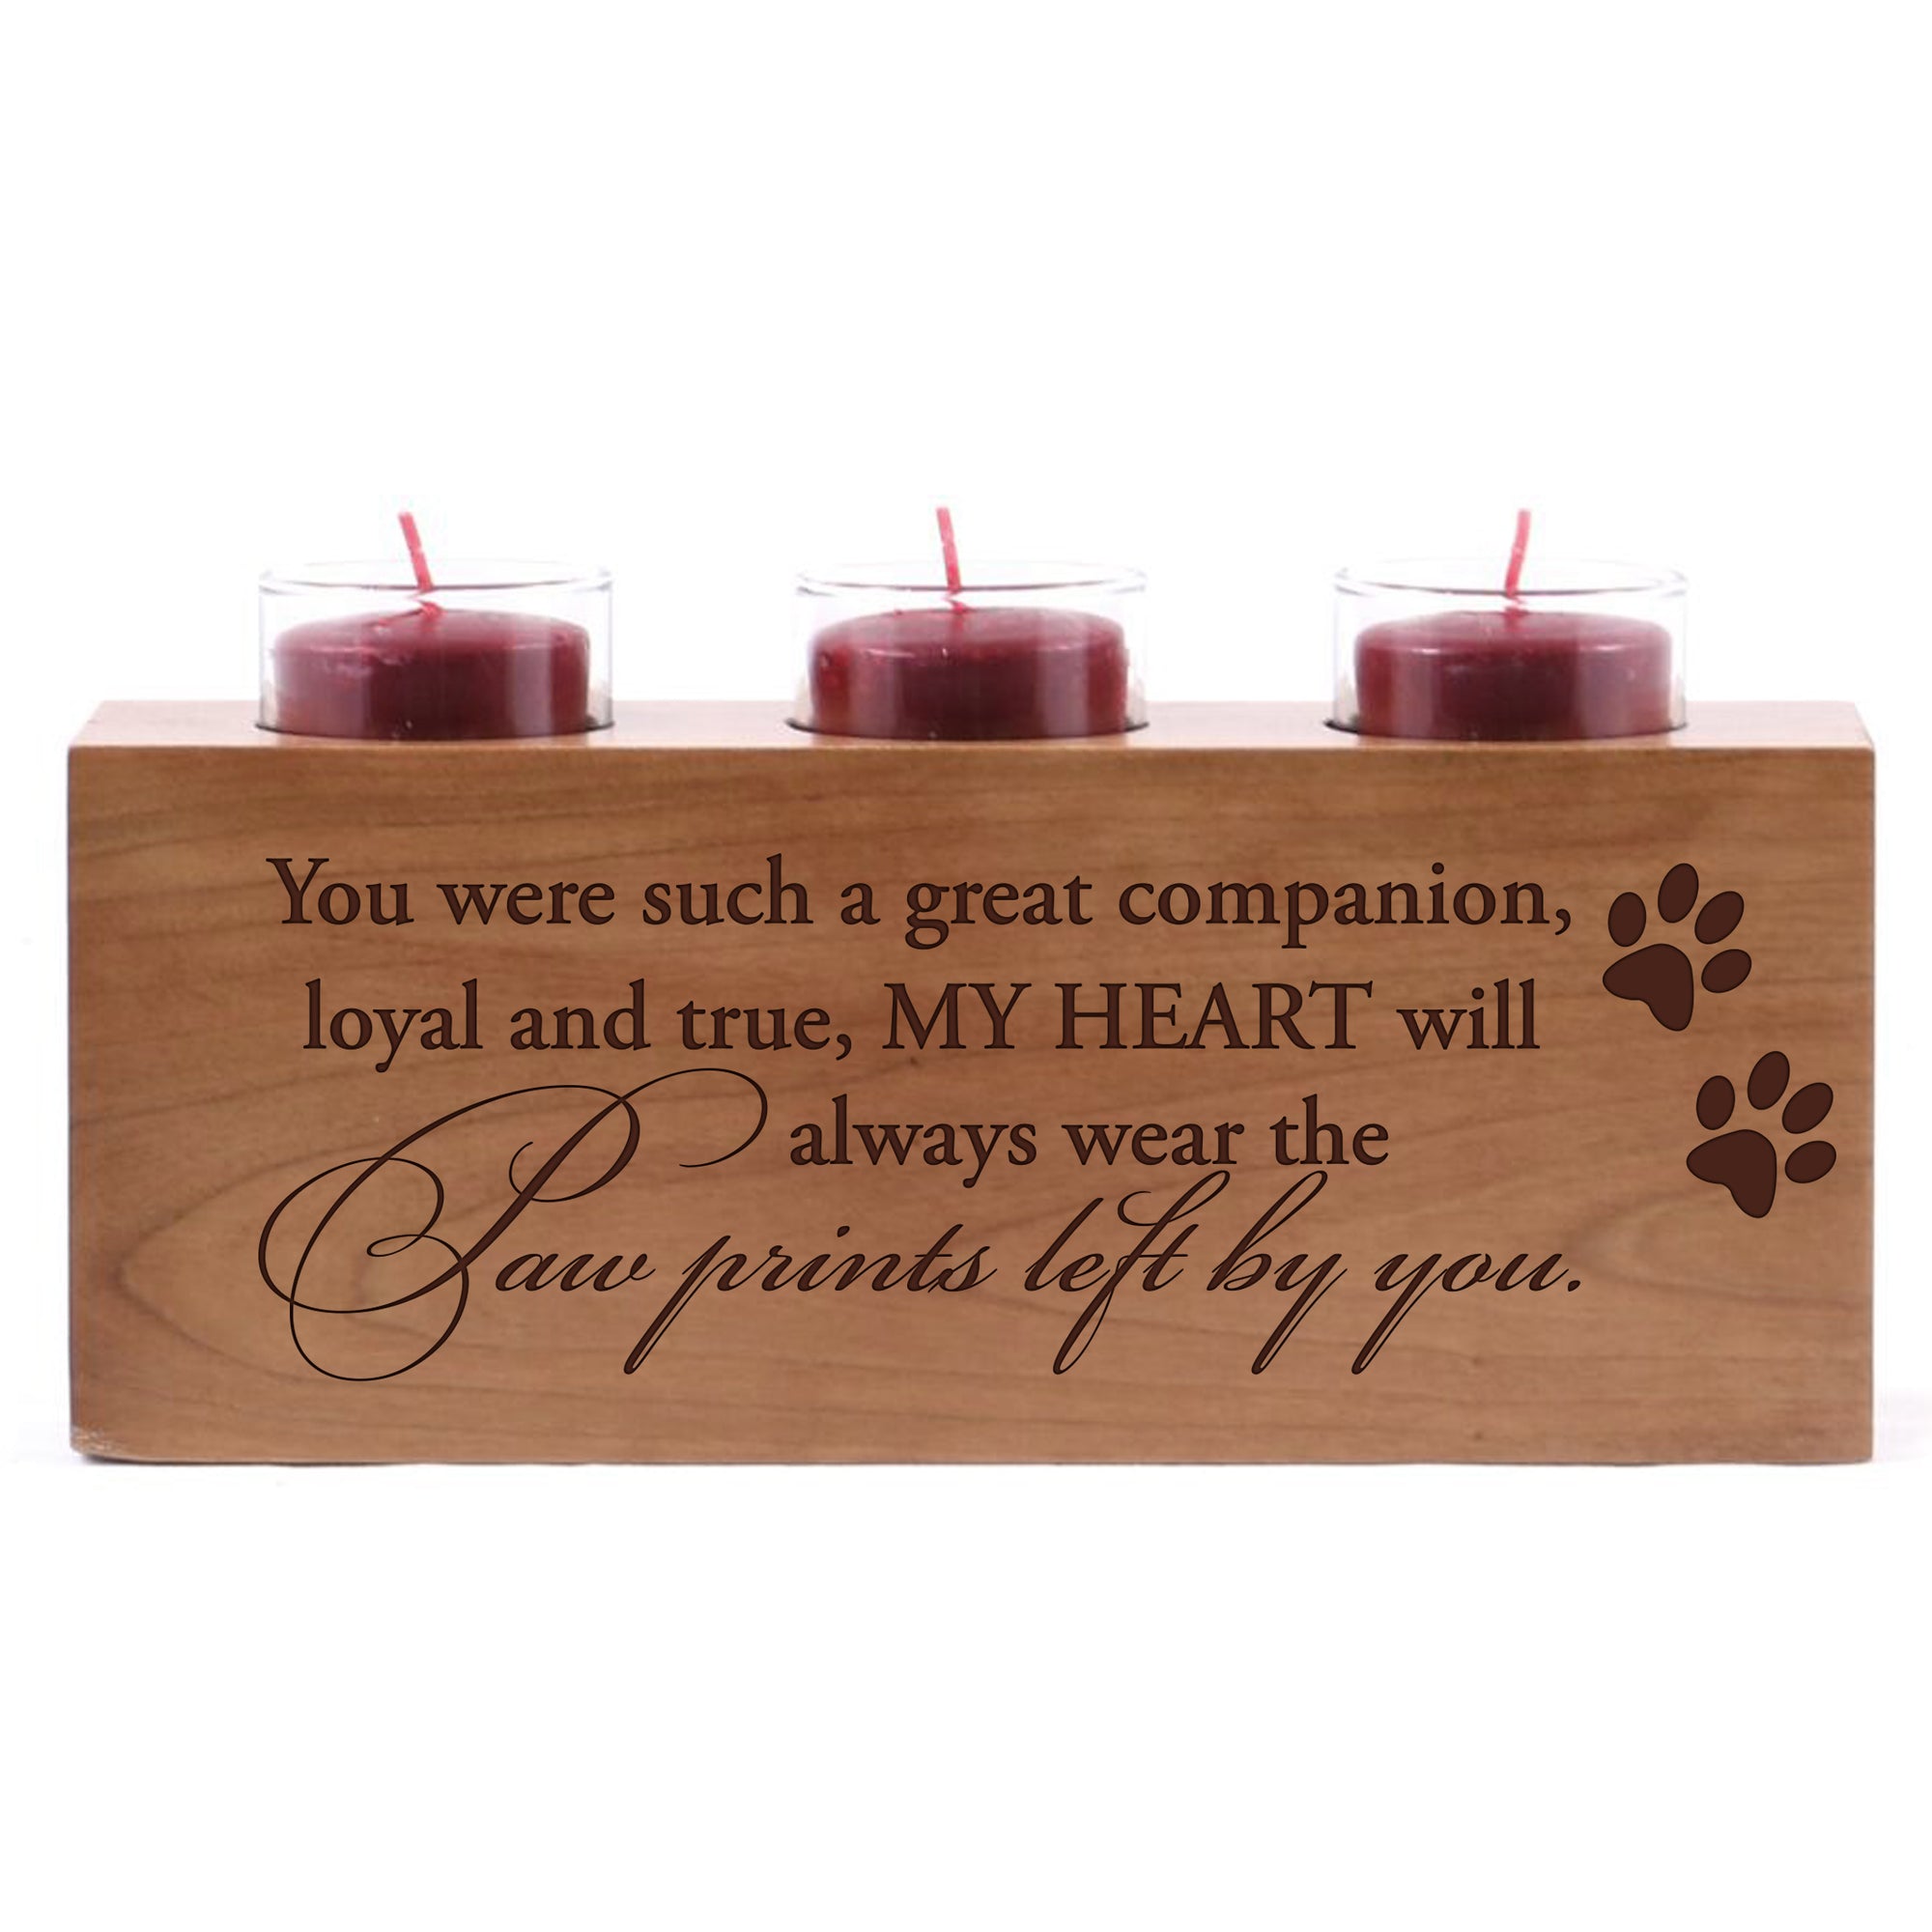 Pet Memorial sympathy candle holder engraved pet bereavement loss home decoration wood for beloved pet 10" L x 4" H by LifeSong Milestones